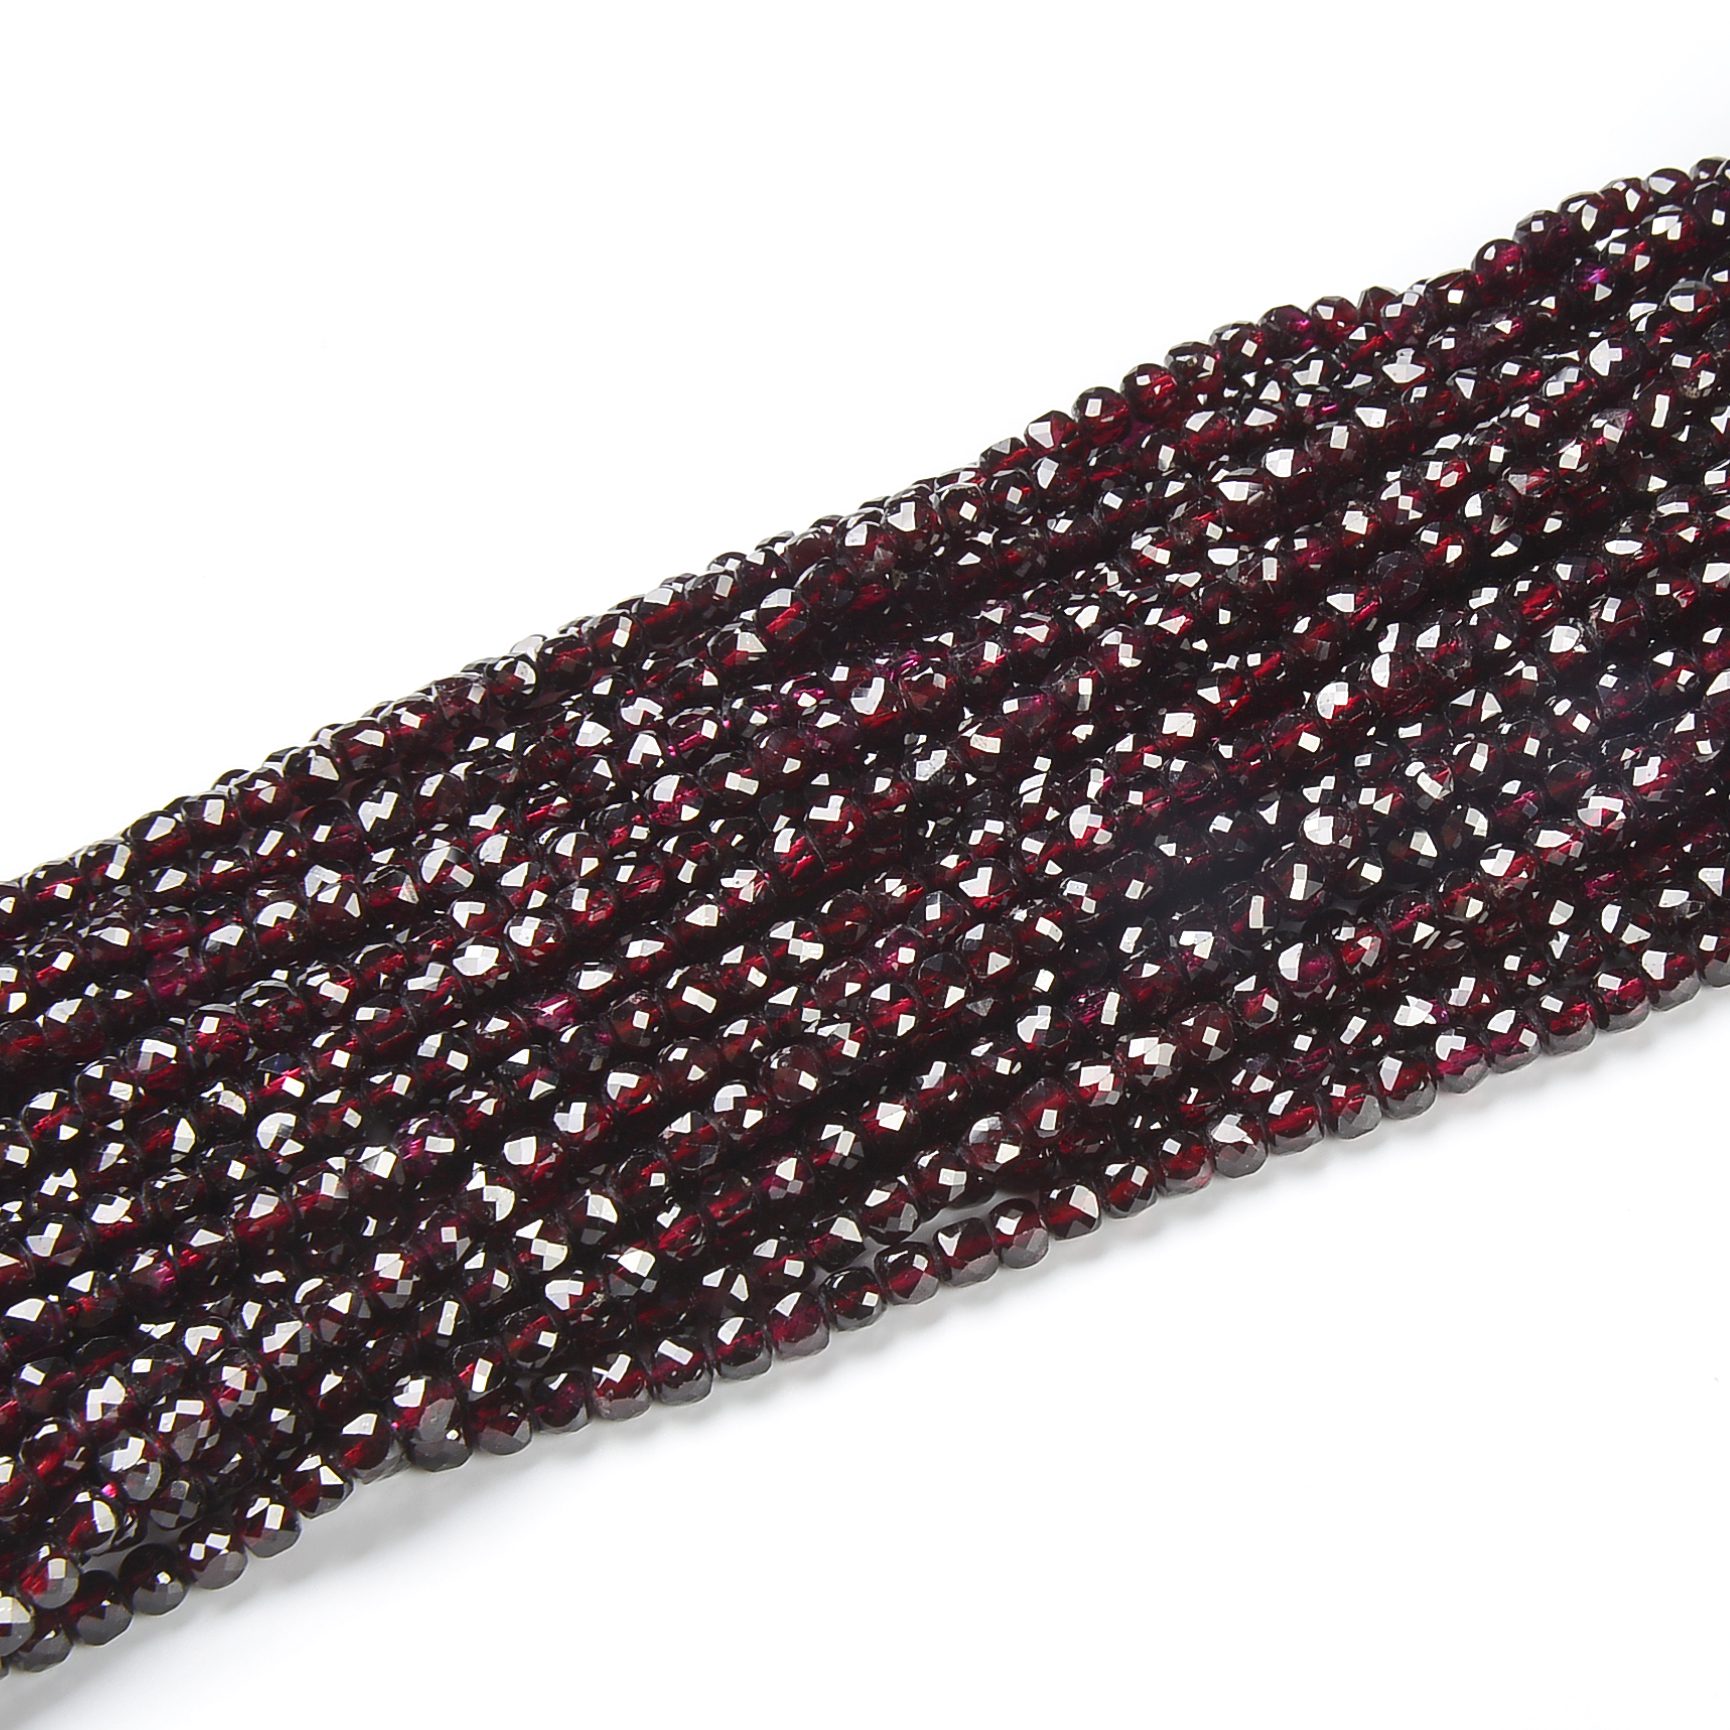 Faceted Natural Red Garnet Rondelle Beads 8mm Red Sparkle Diamond Cut ...